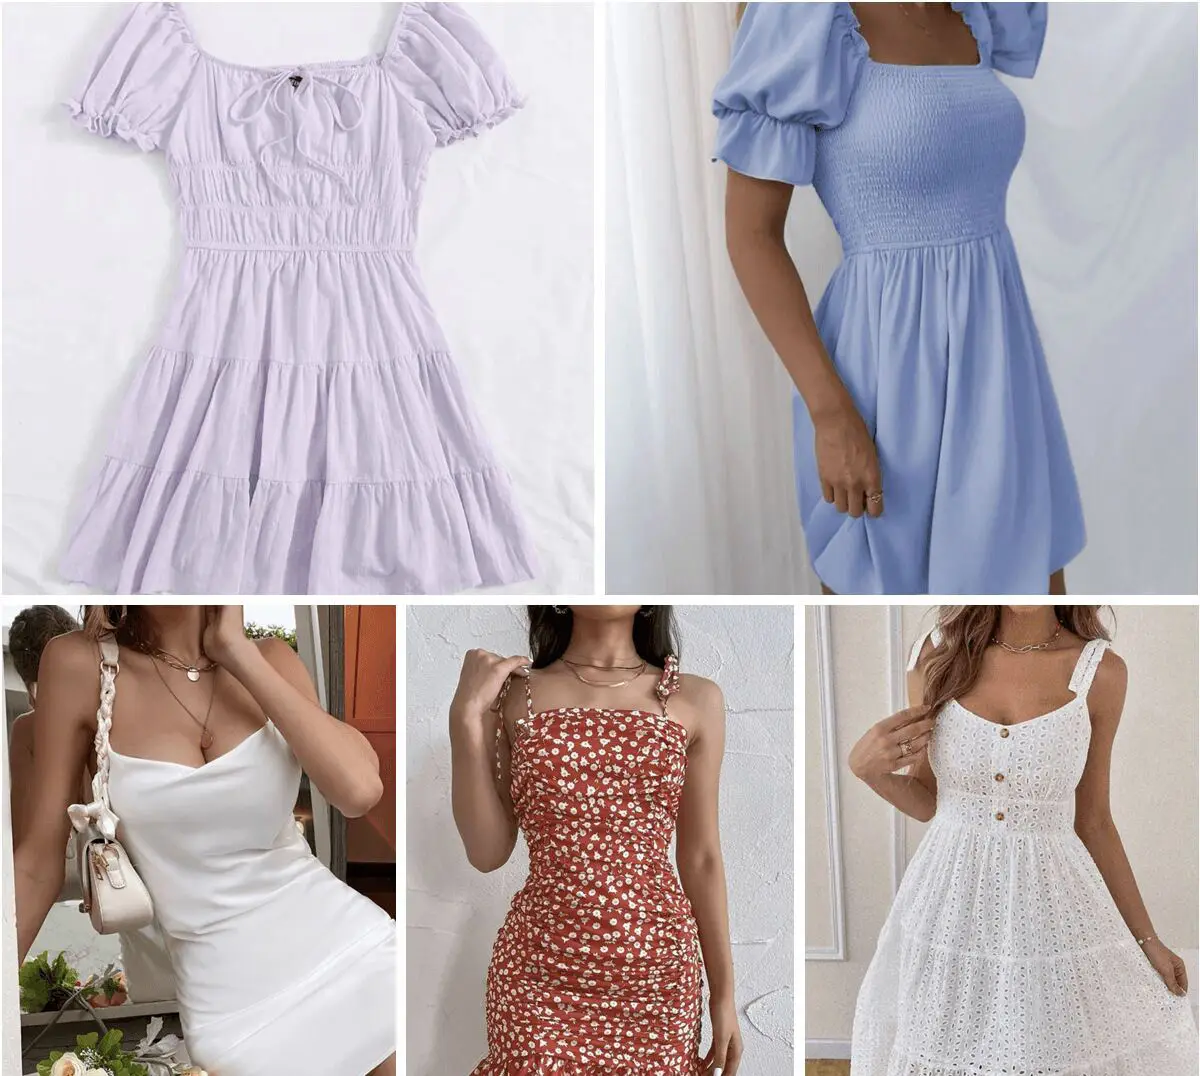 Used Dress for adult ladies bales mixed used lady clothing dubai used clothes in bales uk bales